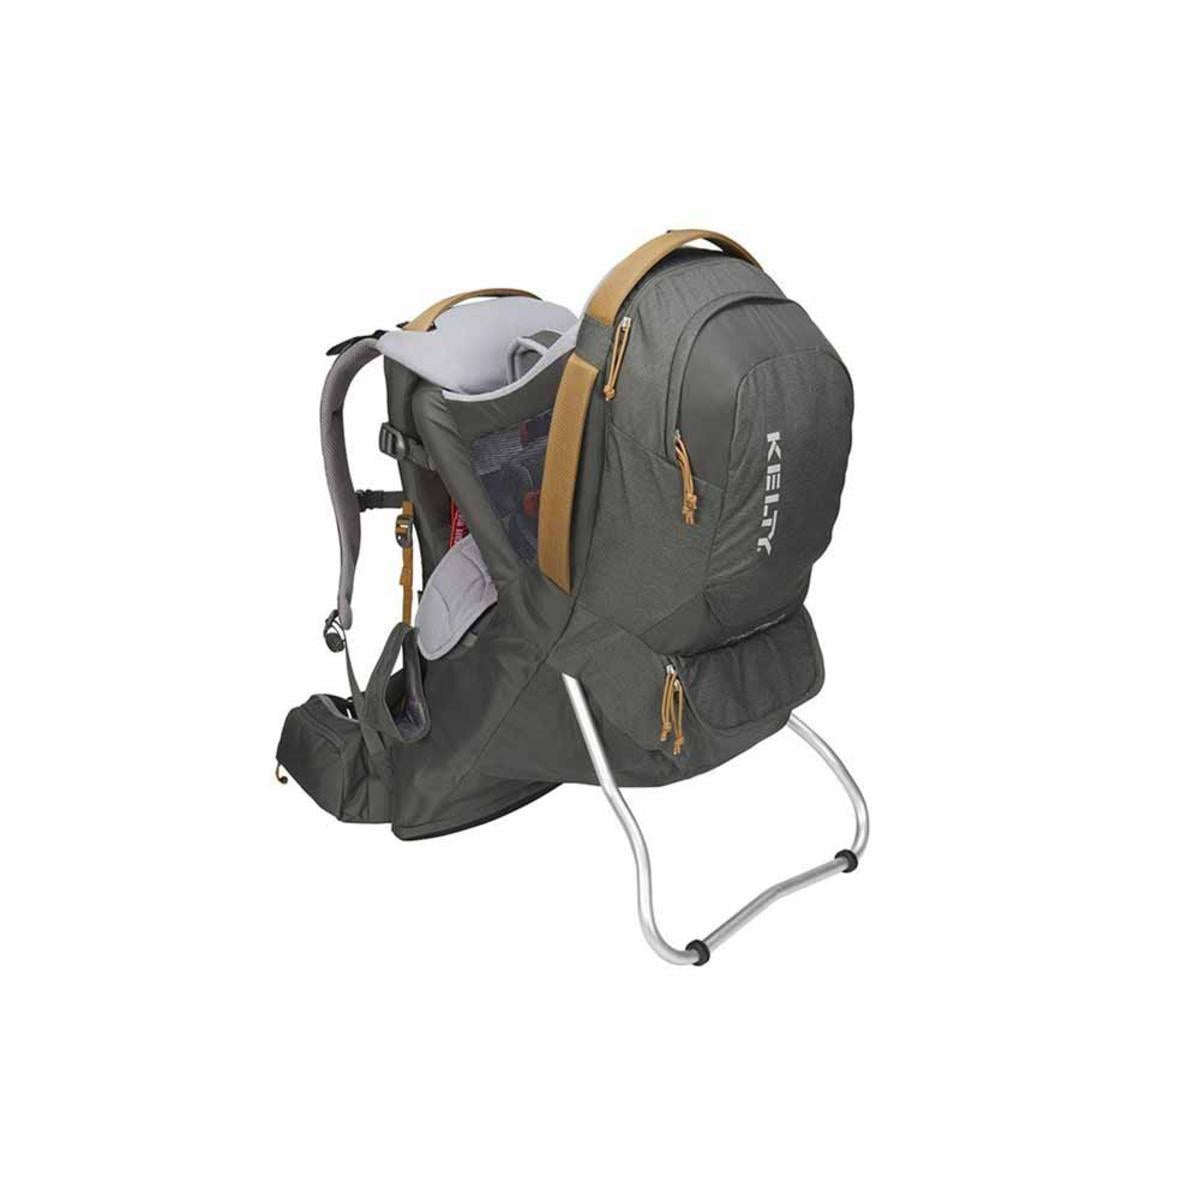 Kelty Journey Perfectfit Signature Child Carrier